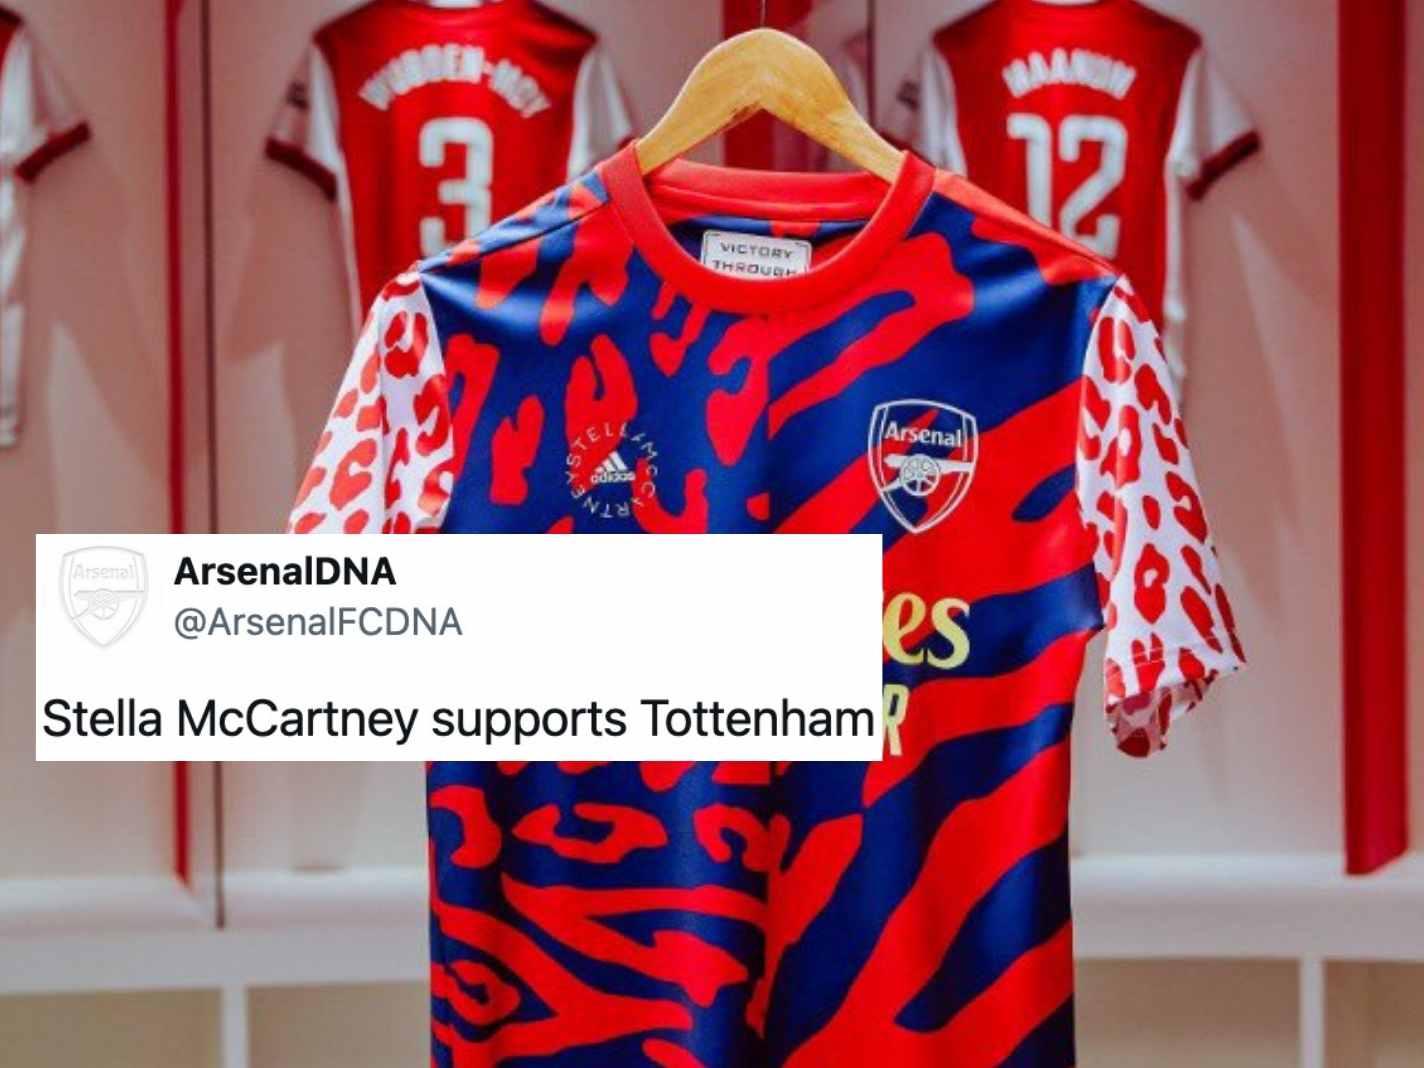 New Arsenal kit designed by Stella McCartney launches to terrible reviews